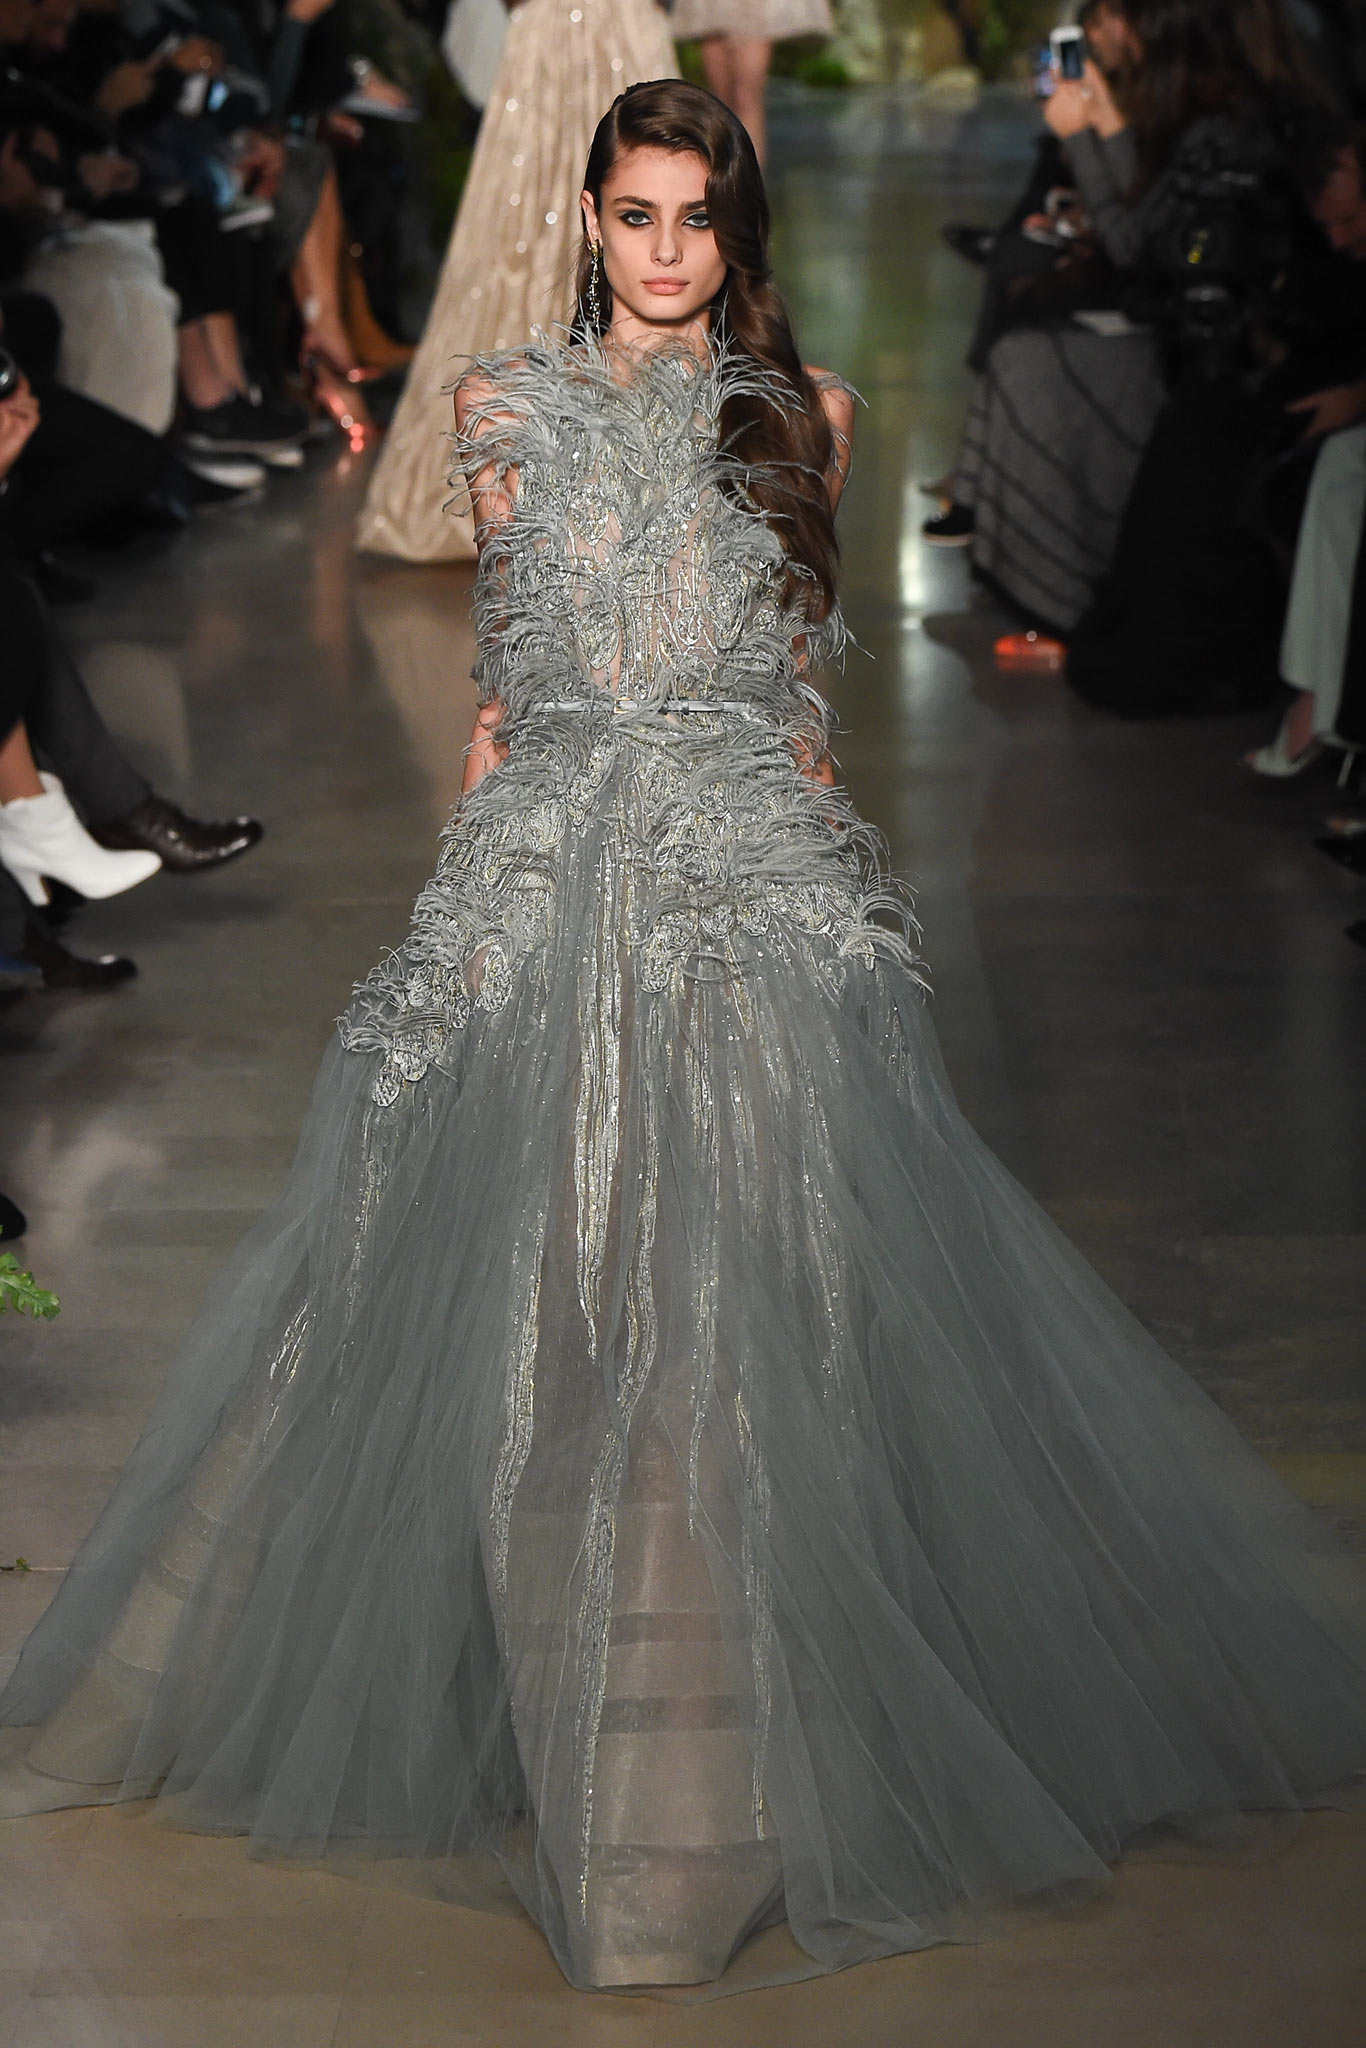 Project Fairytale: Elie Saab Couture Spring 2015